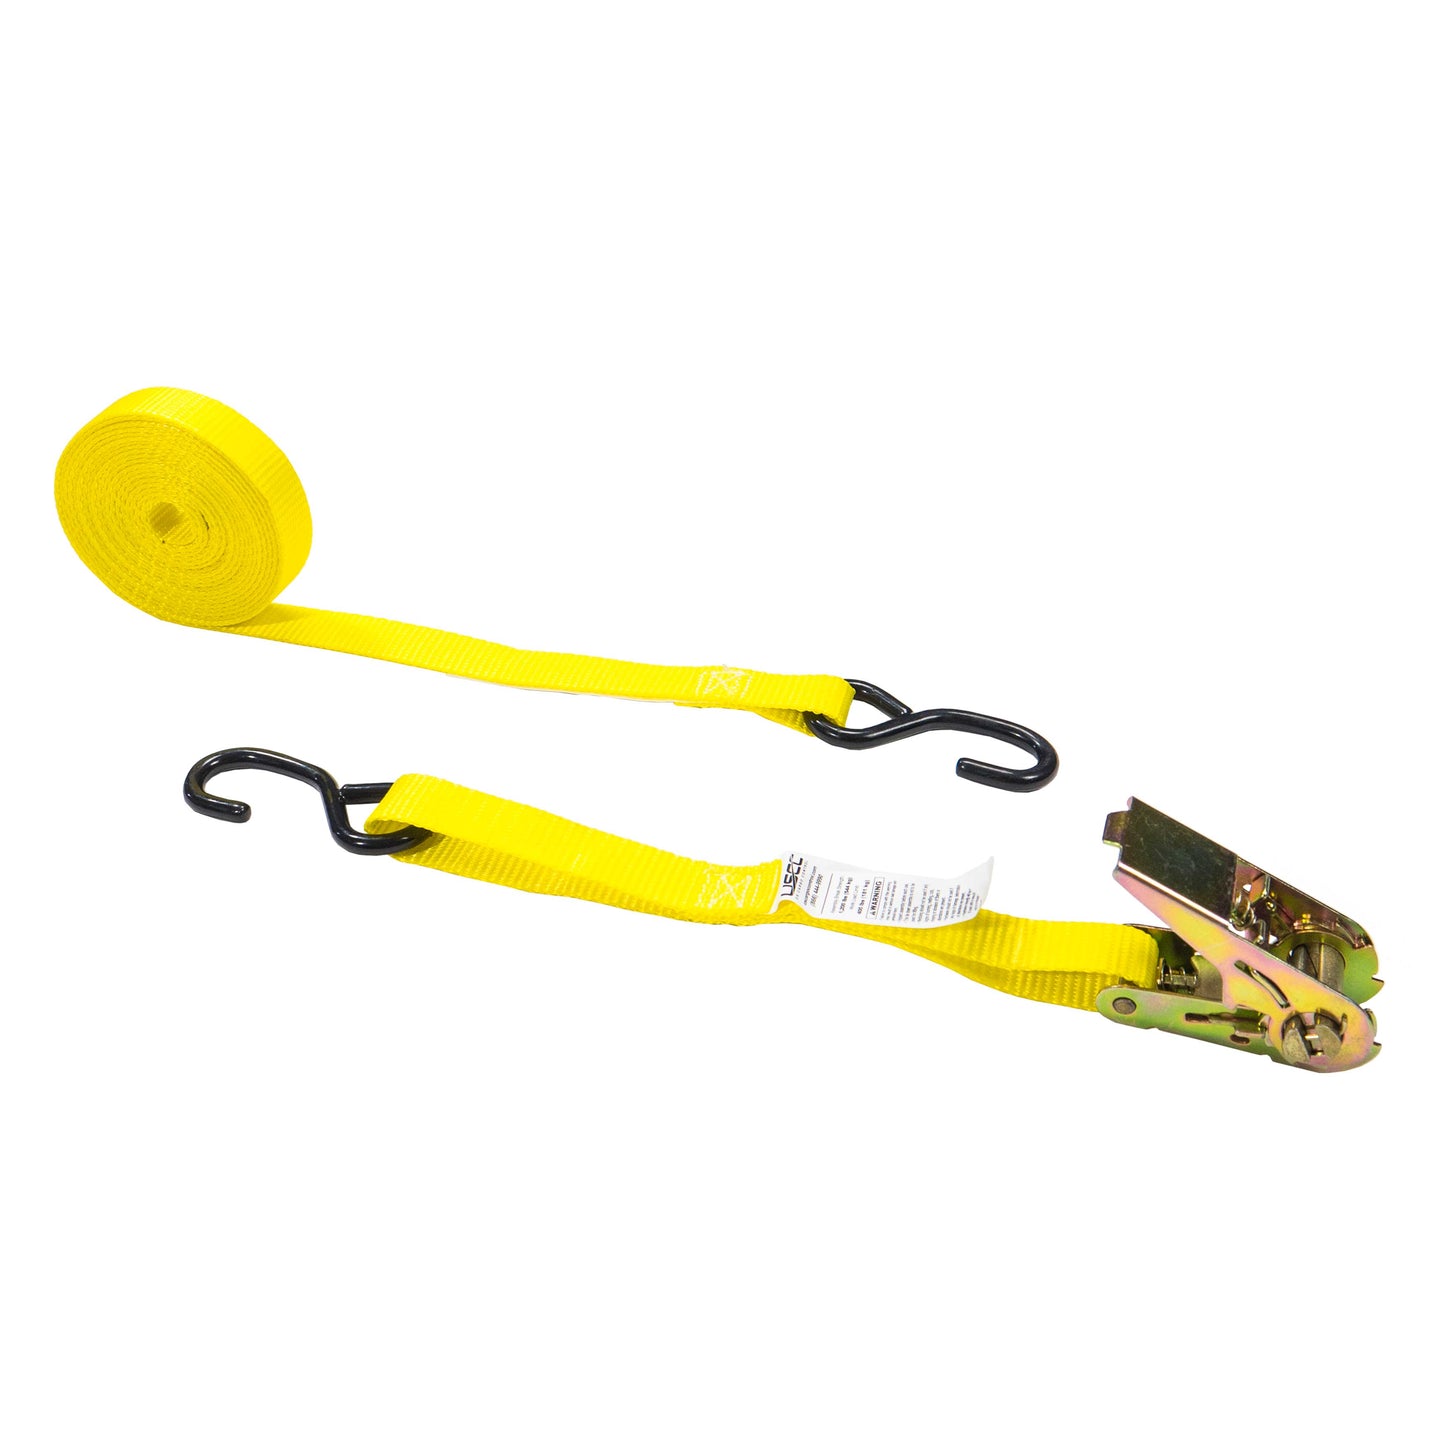 1 inch x 20 foot Ratchet Strap w SHooks (Utility) image 1 of 8